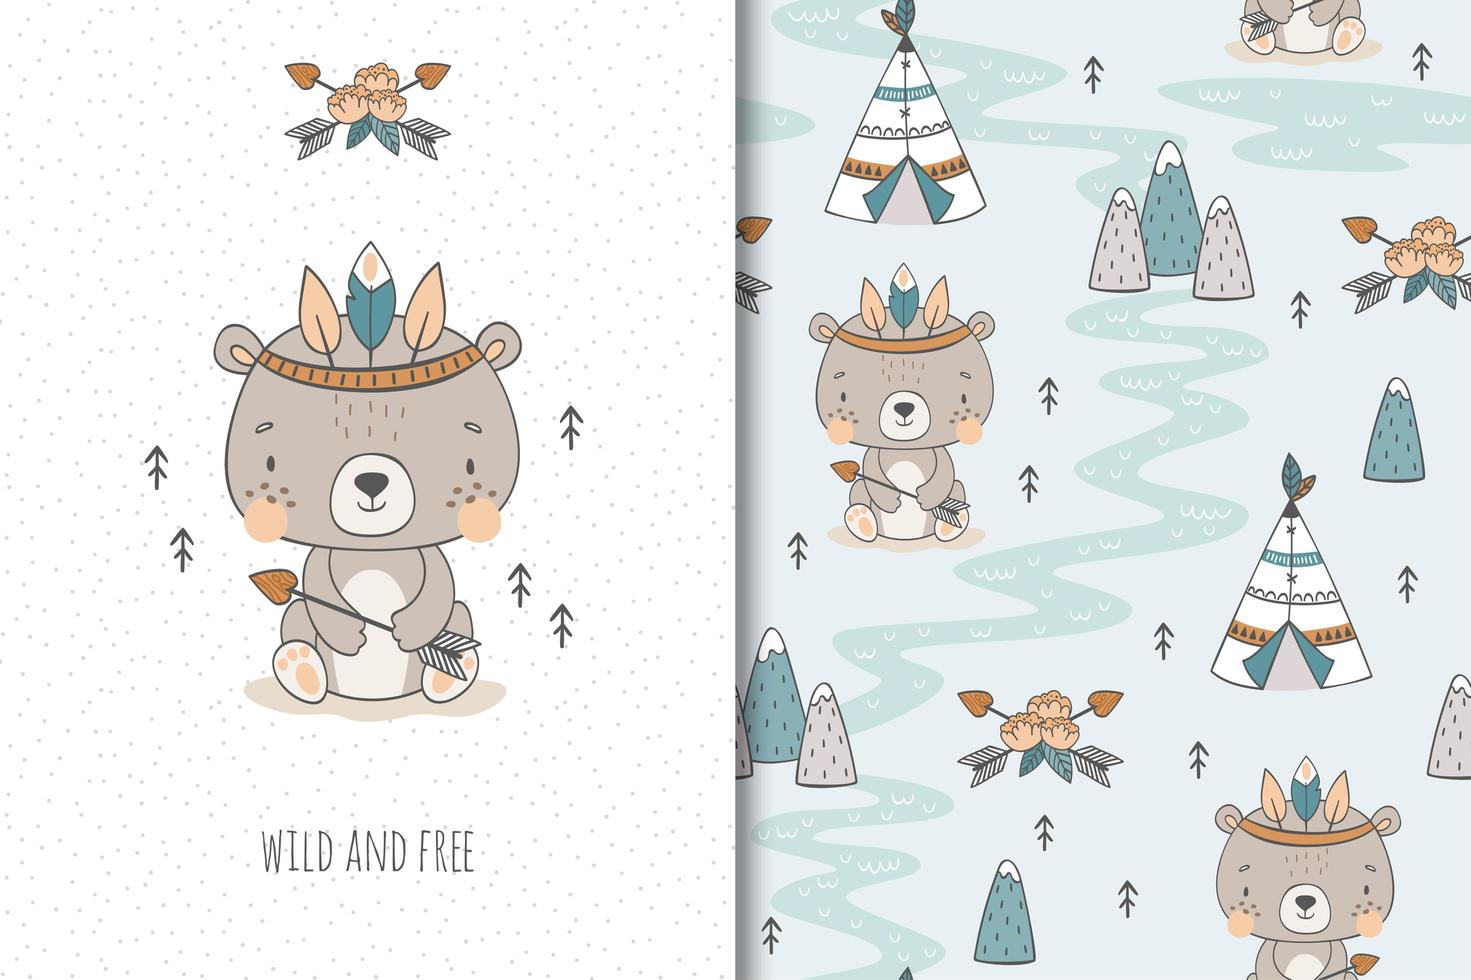 Wild and free tribal bear vector